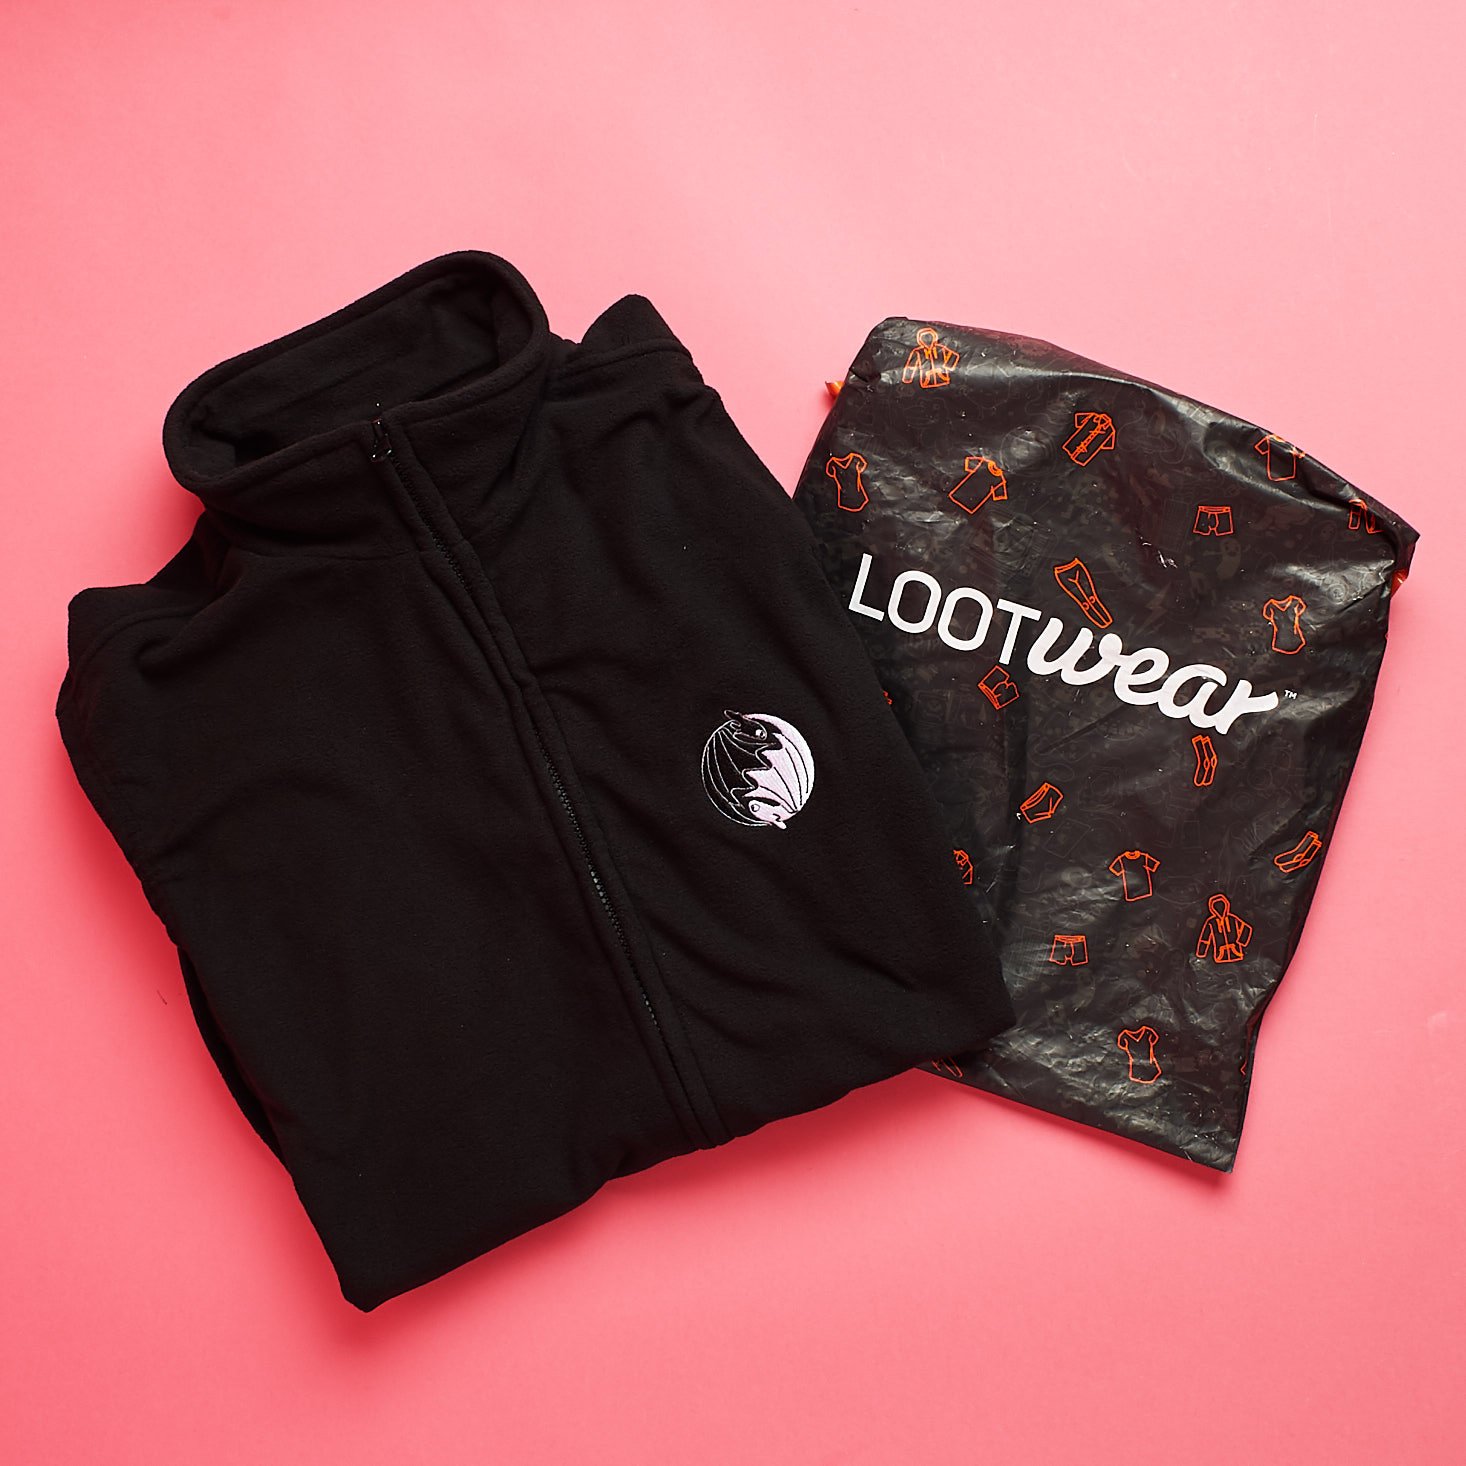 Loot Wearables Subscription by Loot Crate Review + Coupon – February 2019